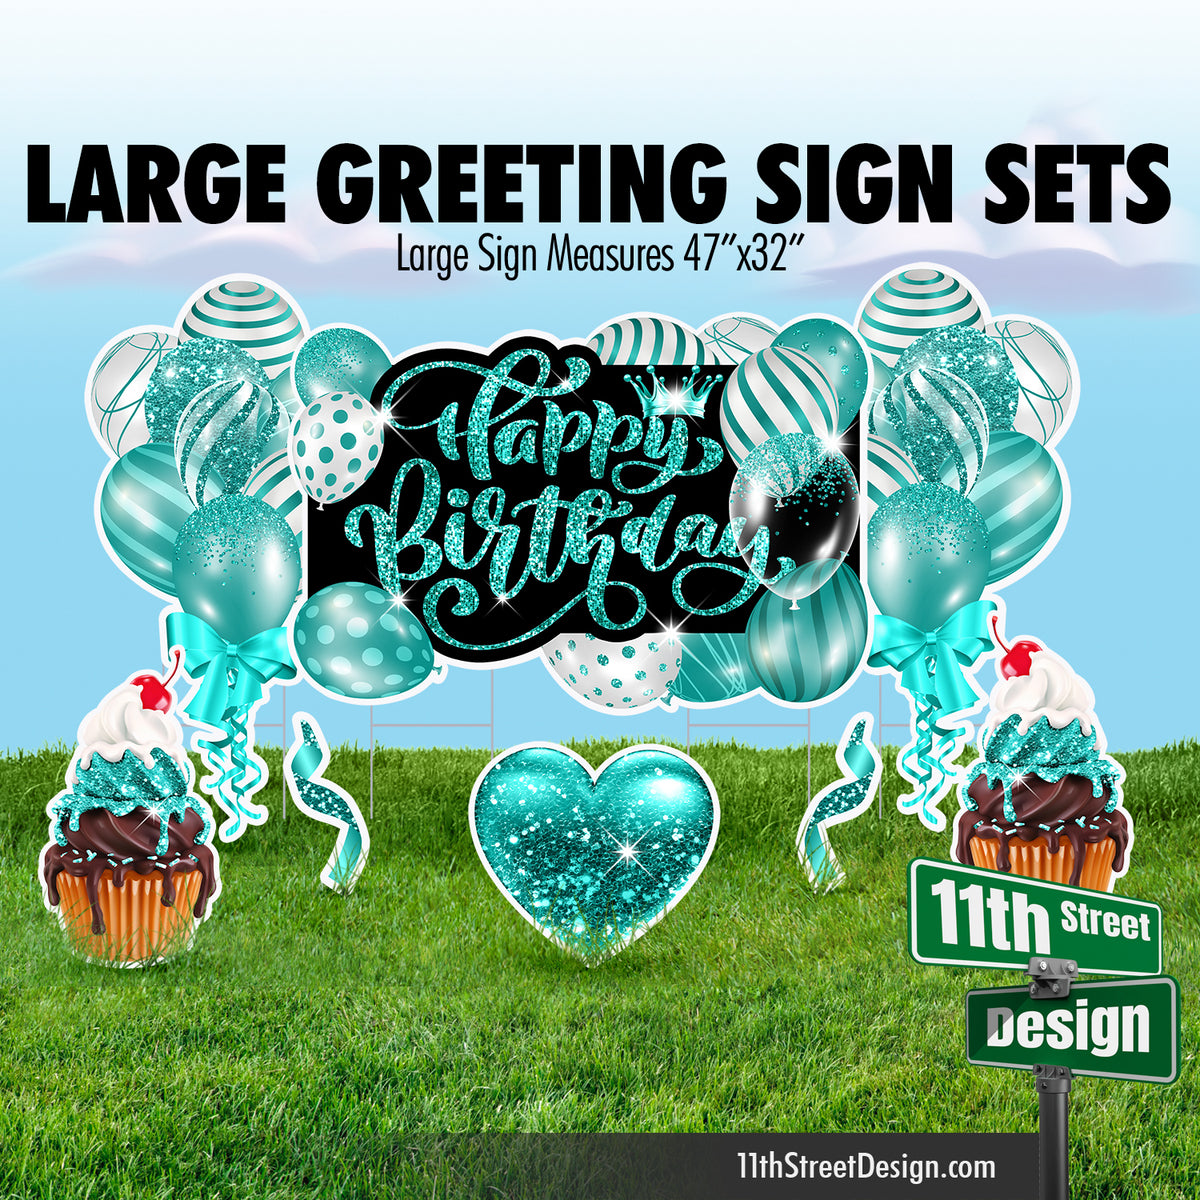 Happy Birthday Large Greeting Sign Flair Set - Teal